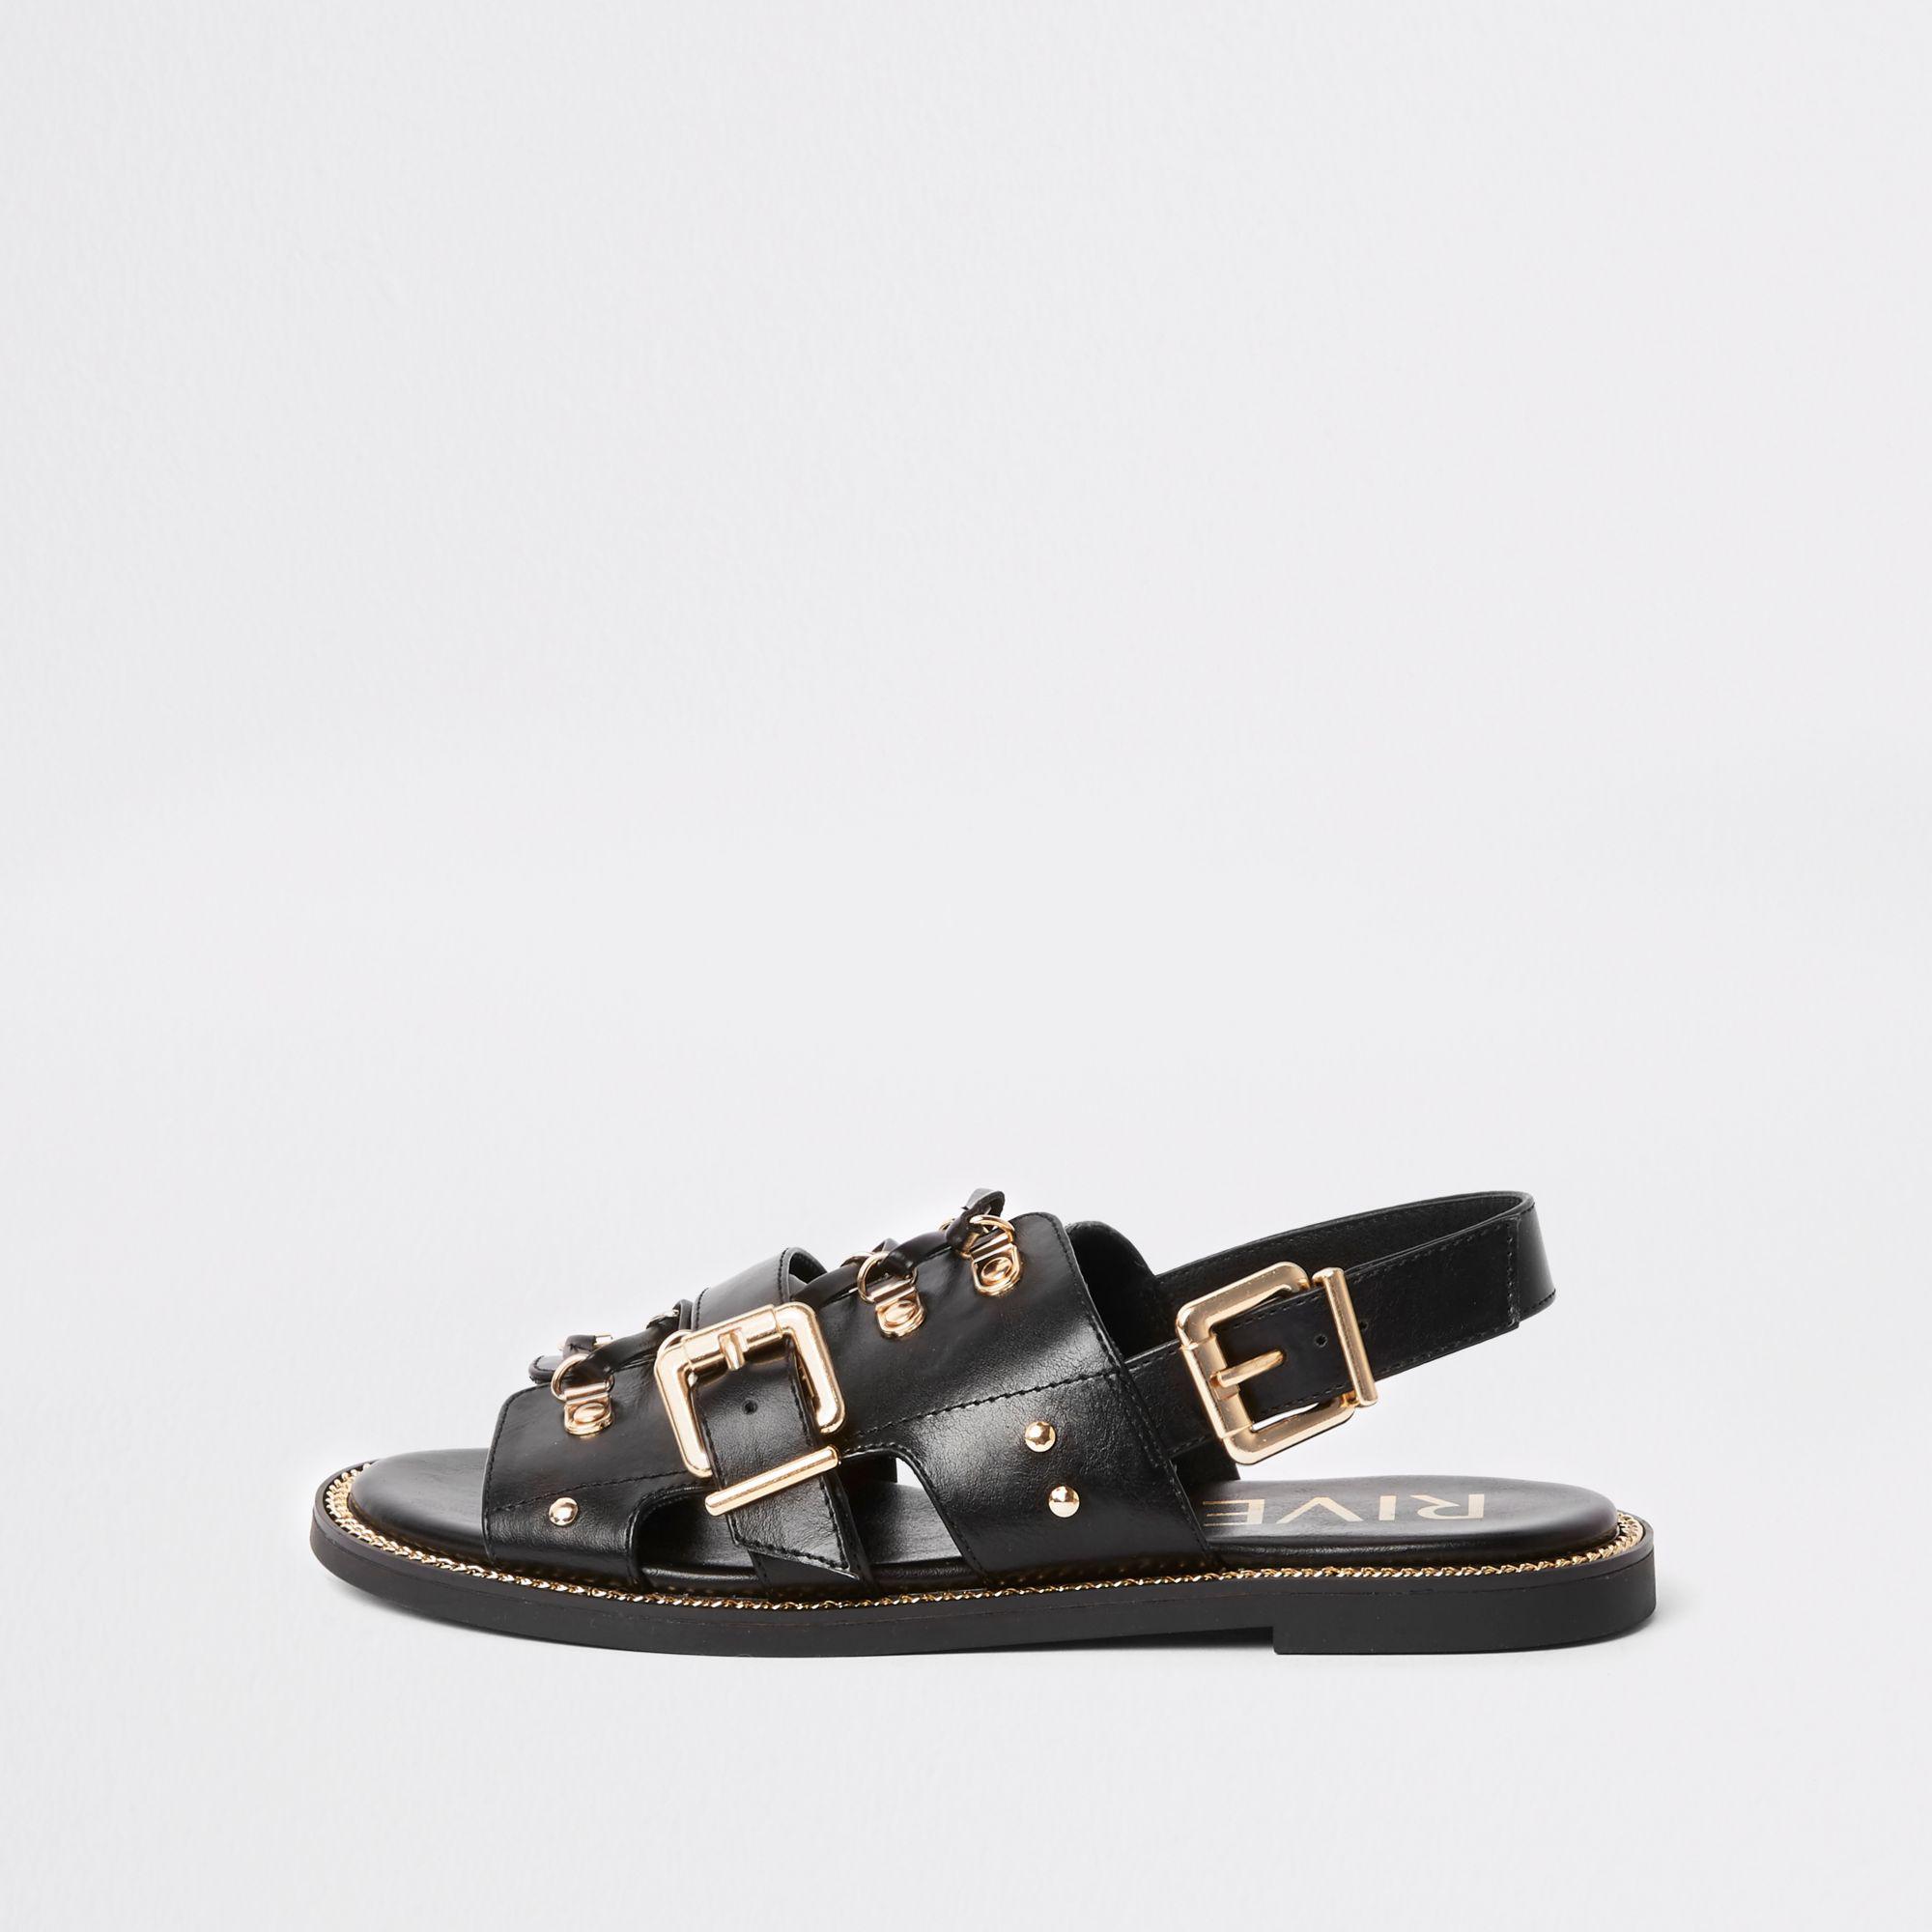 River Island Buckle Strappy Flat Sandals in Black - Lyst